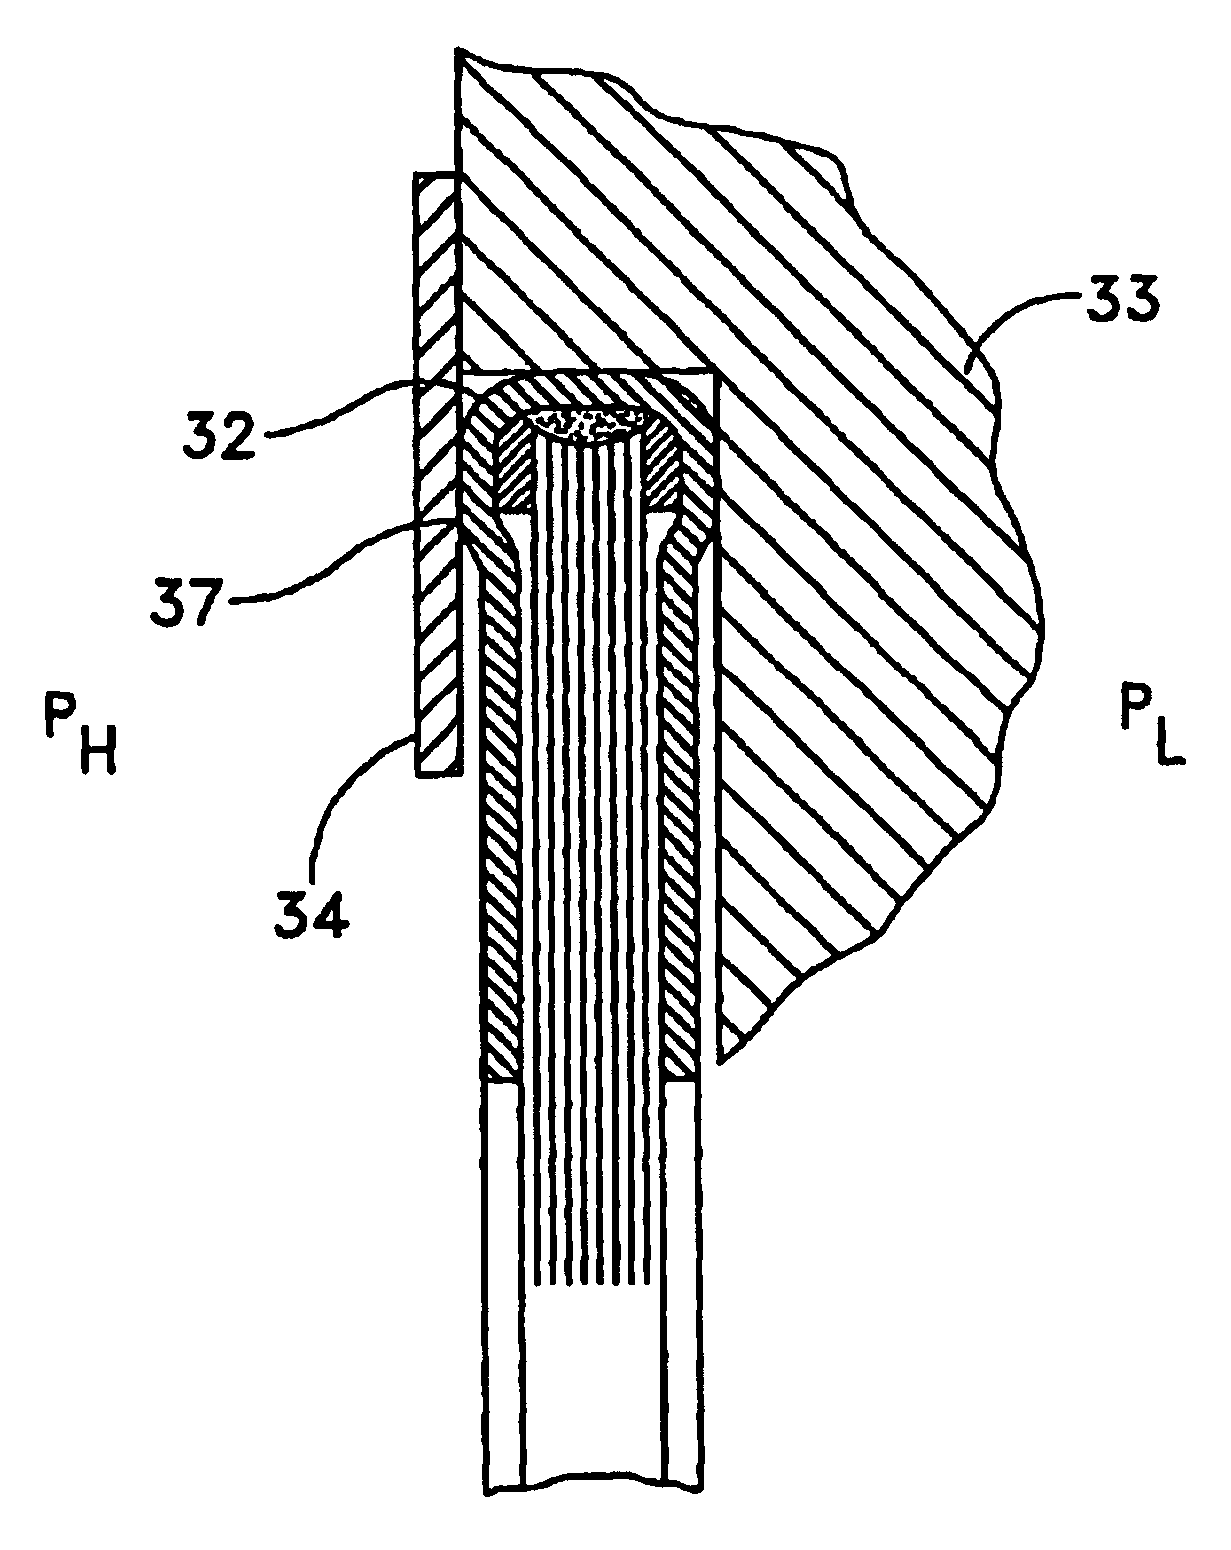 Brush seal assembly, method of manufacture and use